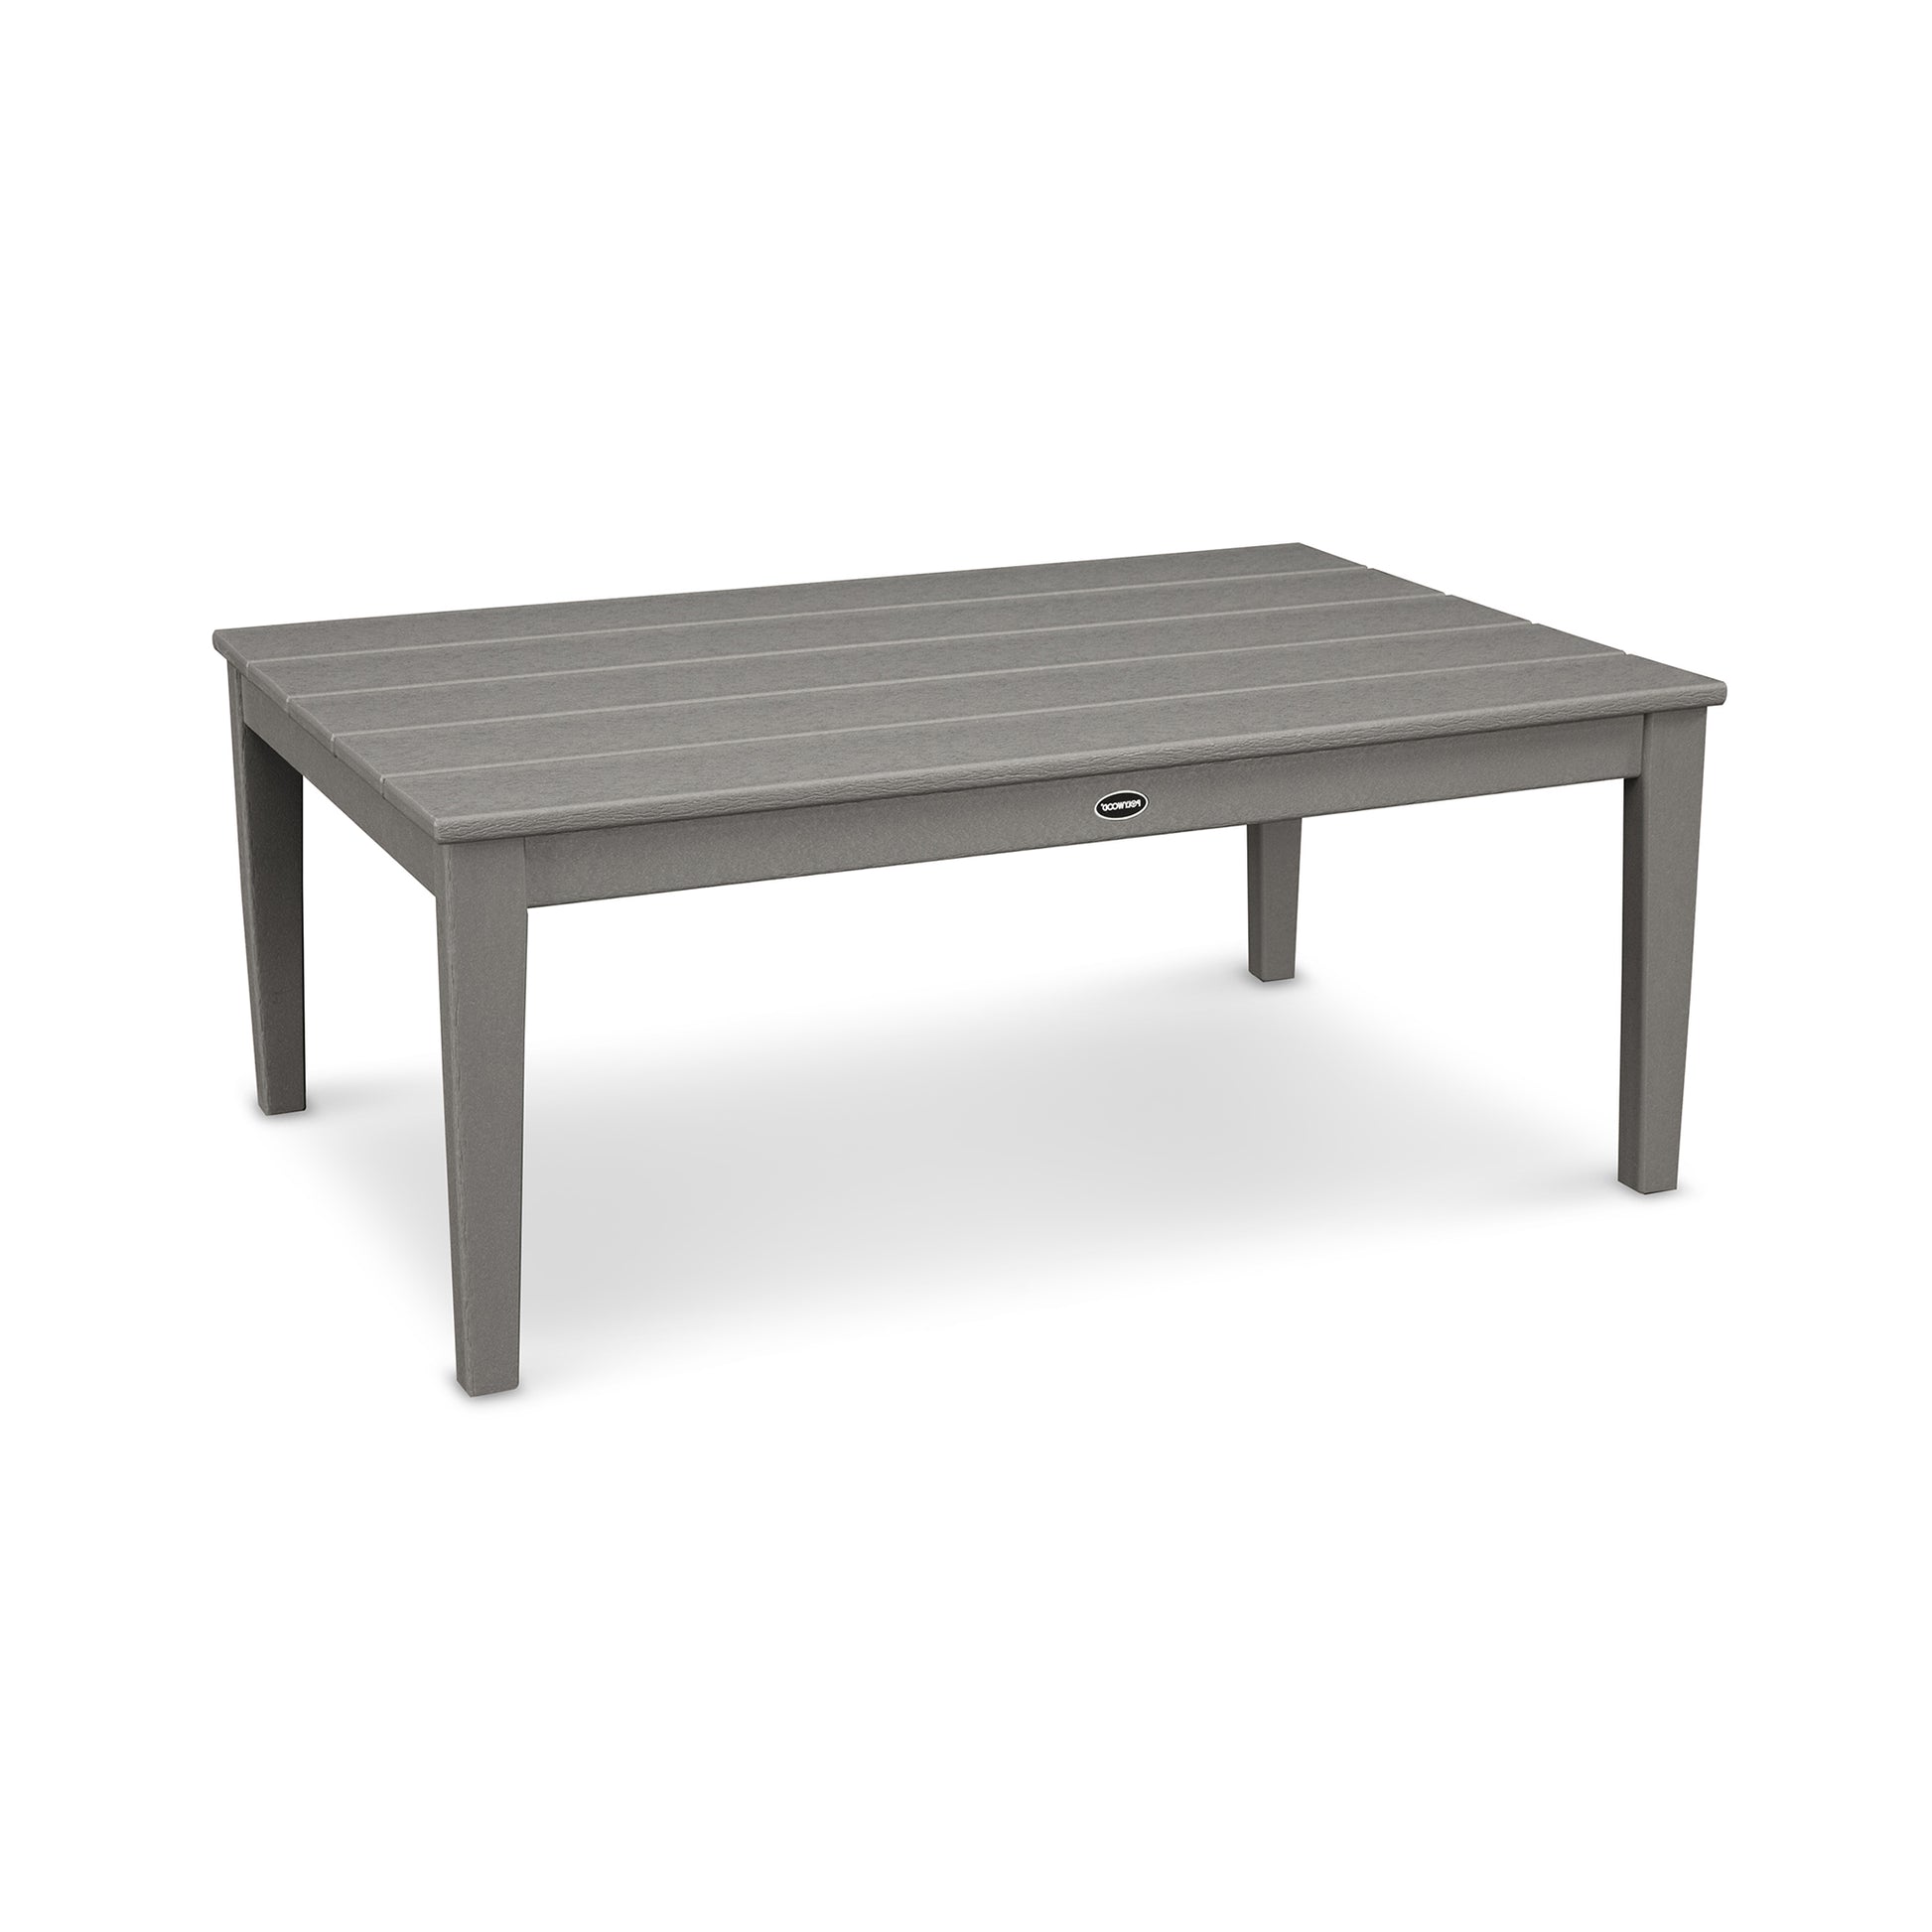 A rectangular gray POLYWOOD Newport 28" x 42" Coffee Table made from POLYWOOD® recycled plastic lumber, with a slatted top and four sturdy legs, isolated on a white background. The table features a small round metal emblem.